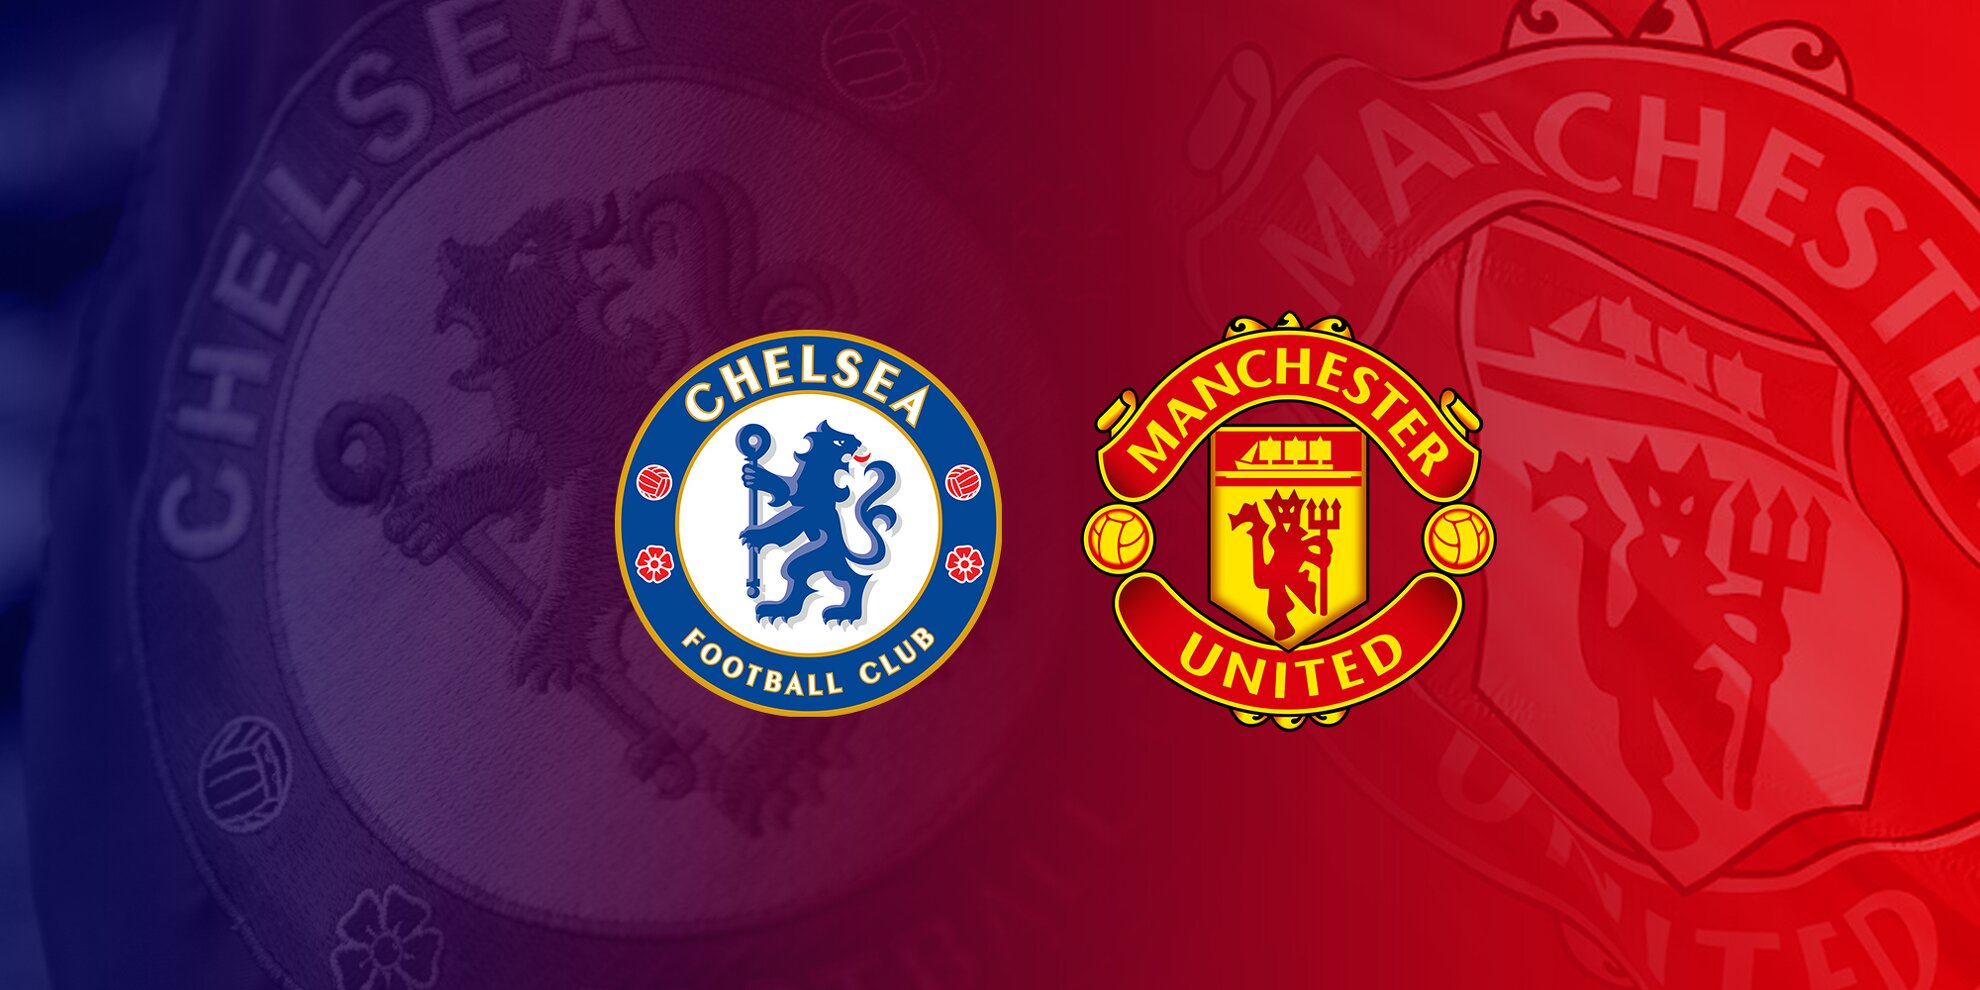 sokapro-Two underperforming top dogs face off tonight at Stamford Bridge as Chelsea host Manchester United. Who will win?